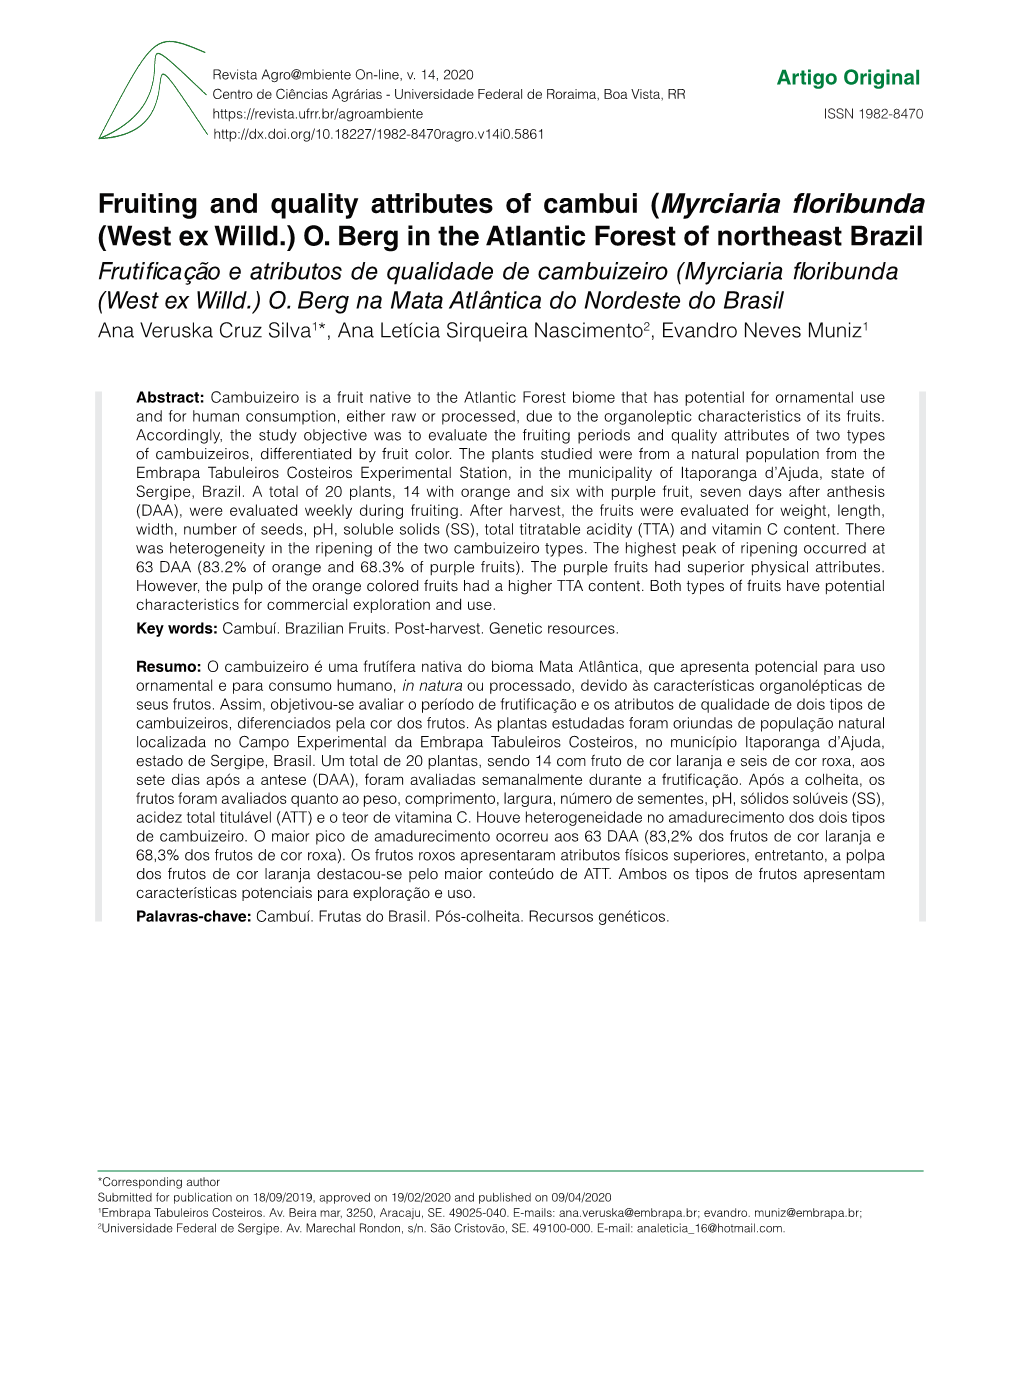 Fruiting and Quality Attributes of Cambui (Myrciaria Floribunda (West Ex Willd.) O. Berg in the Atlantic Forest of Northeast